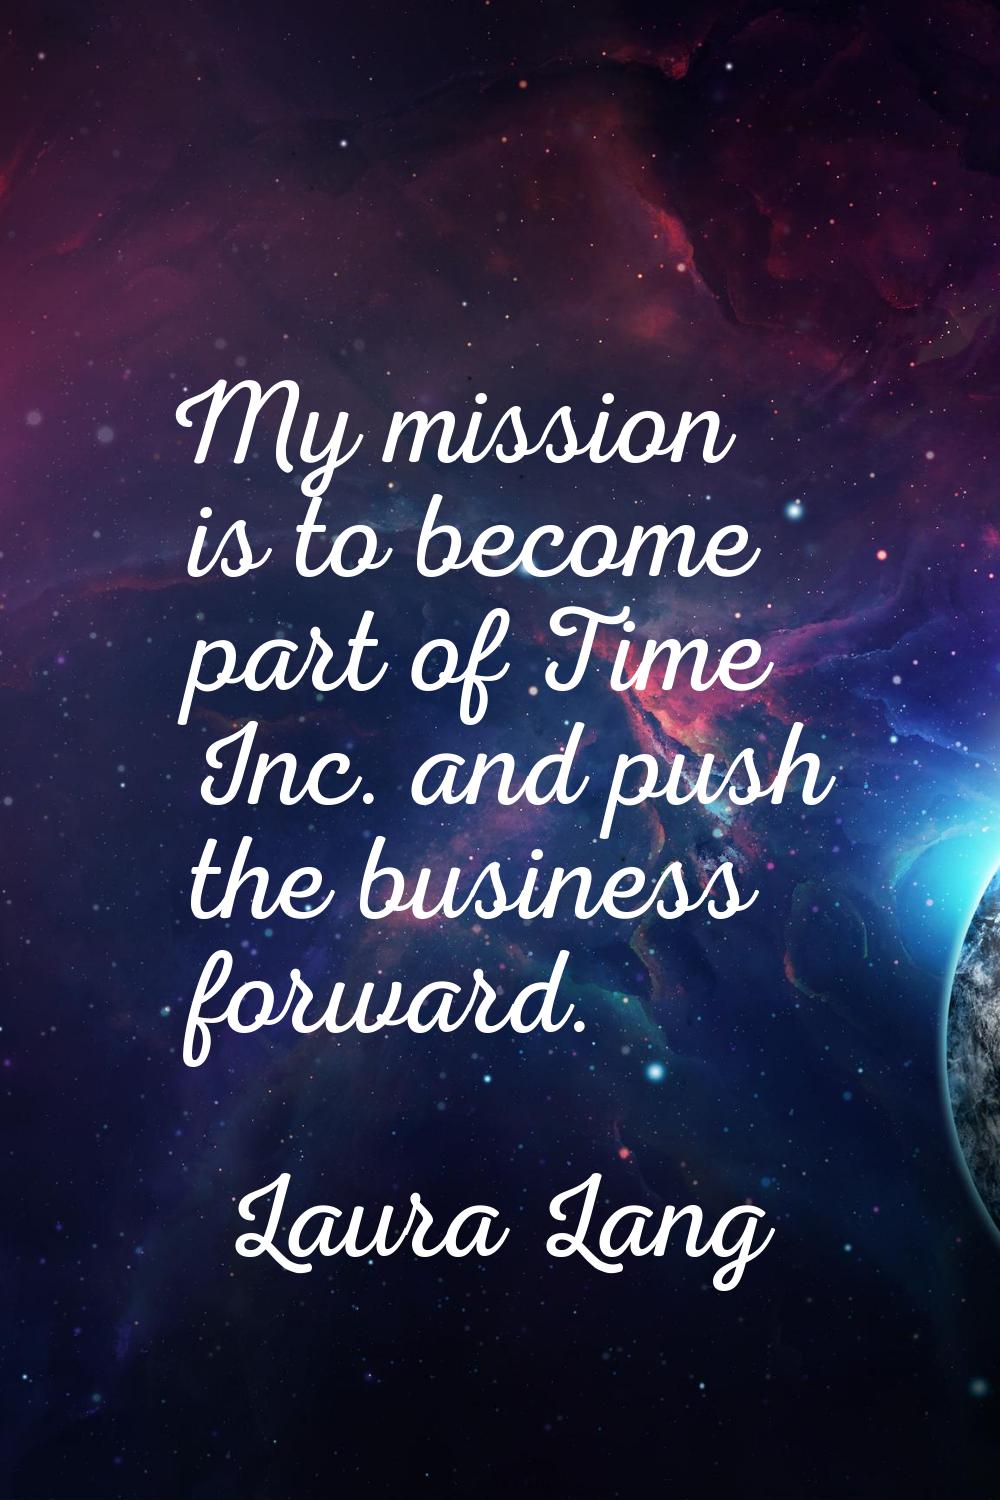 My mission is to become part of Time Inc. and push the business forward.